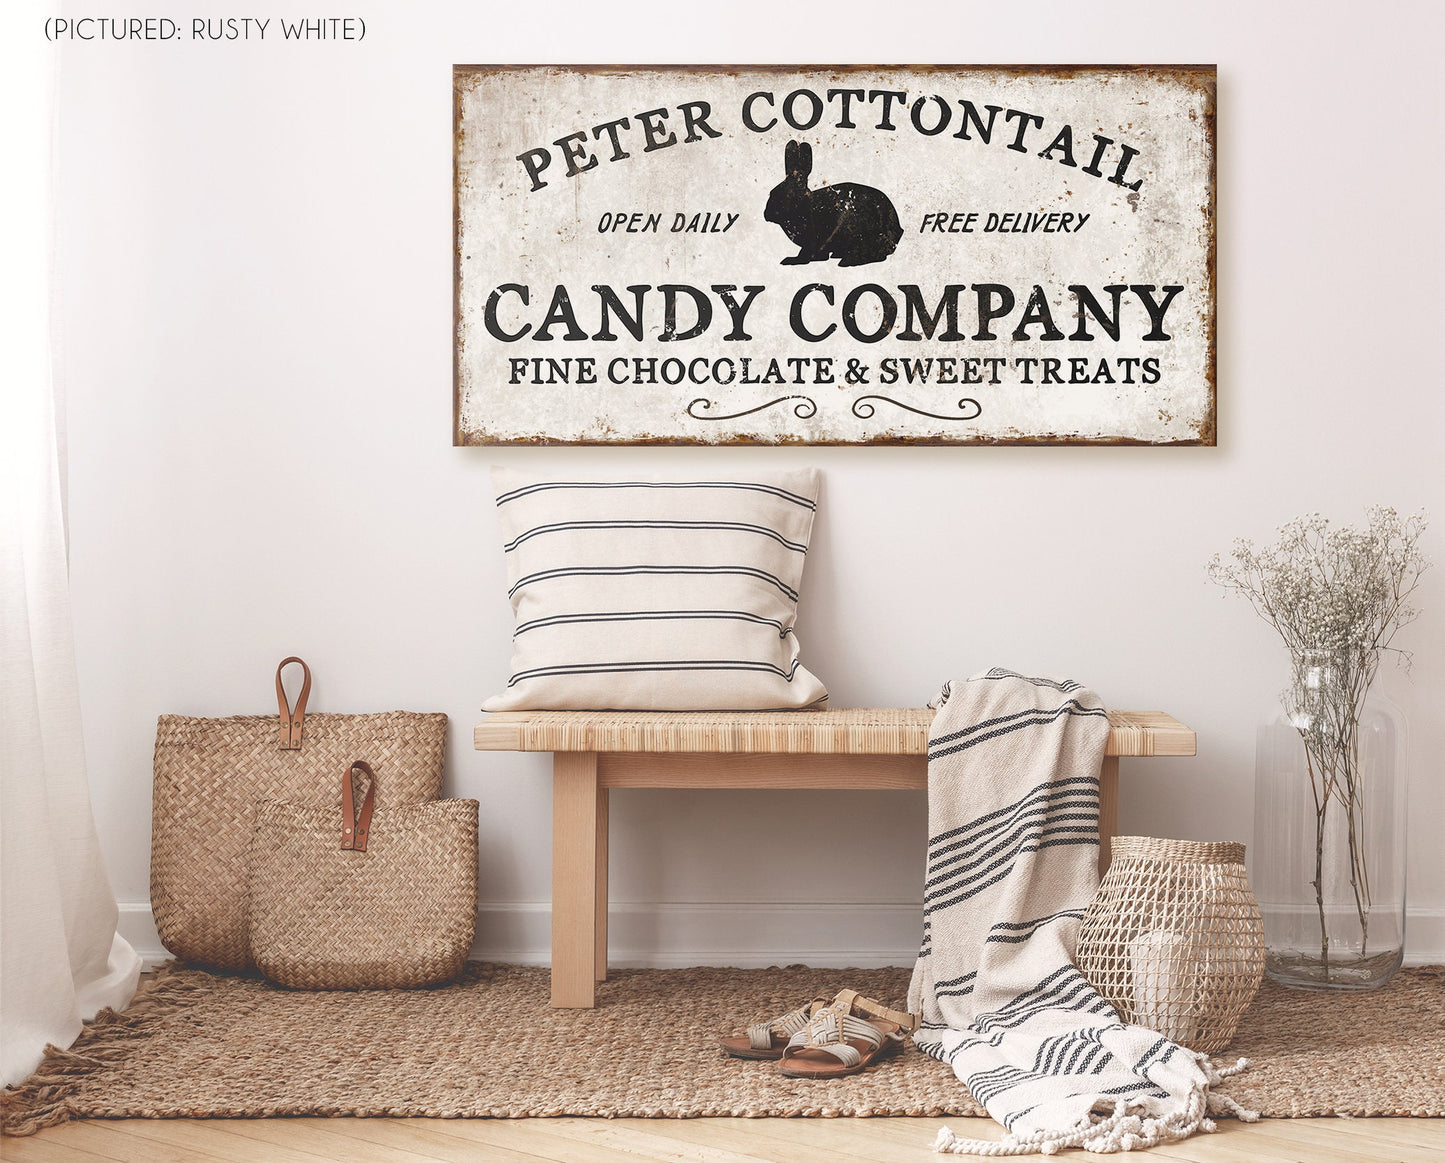 PETER COTTONTAIL CANDY COMPANY SIGN